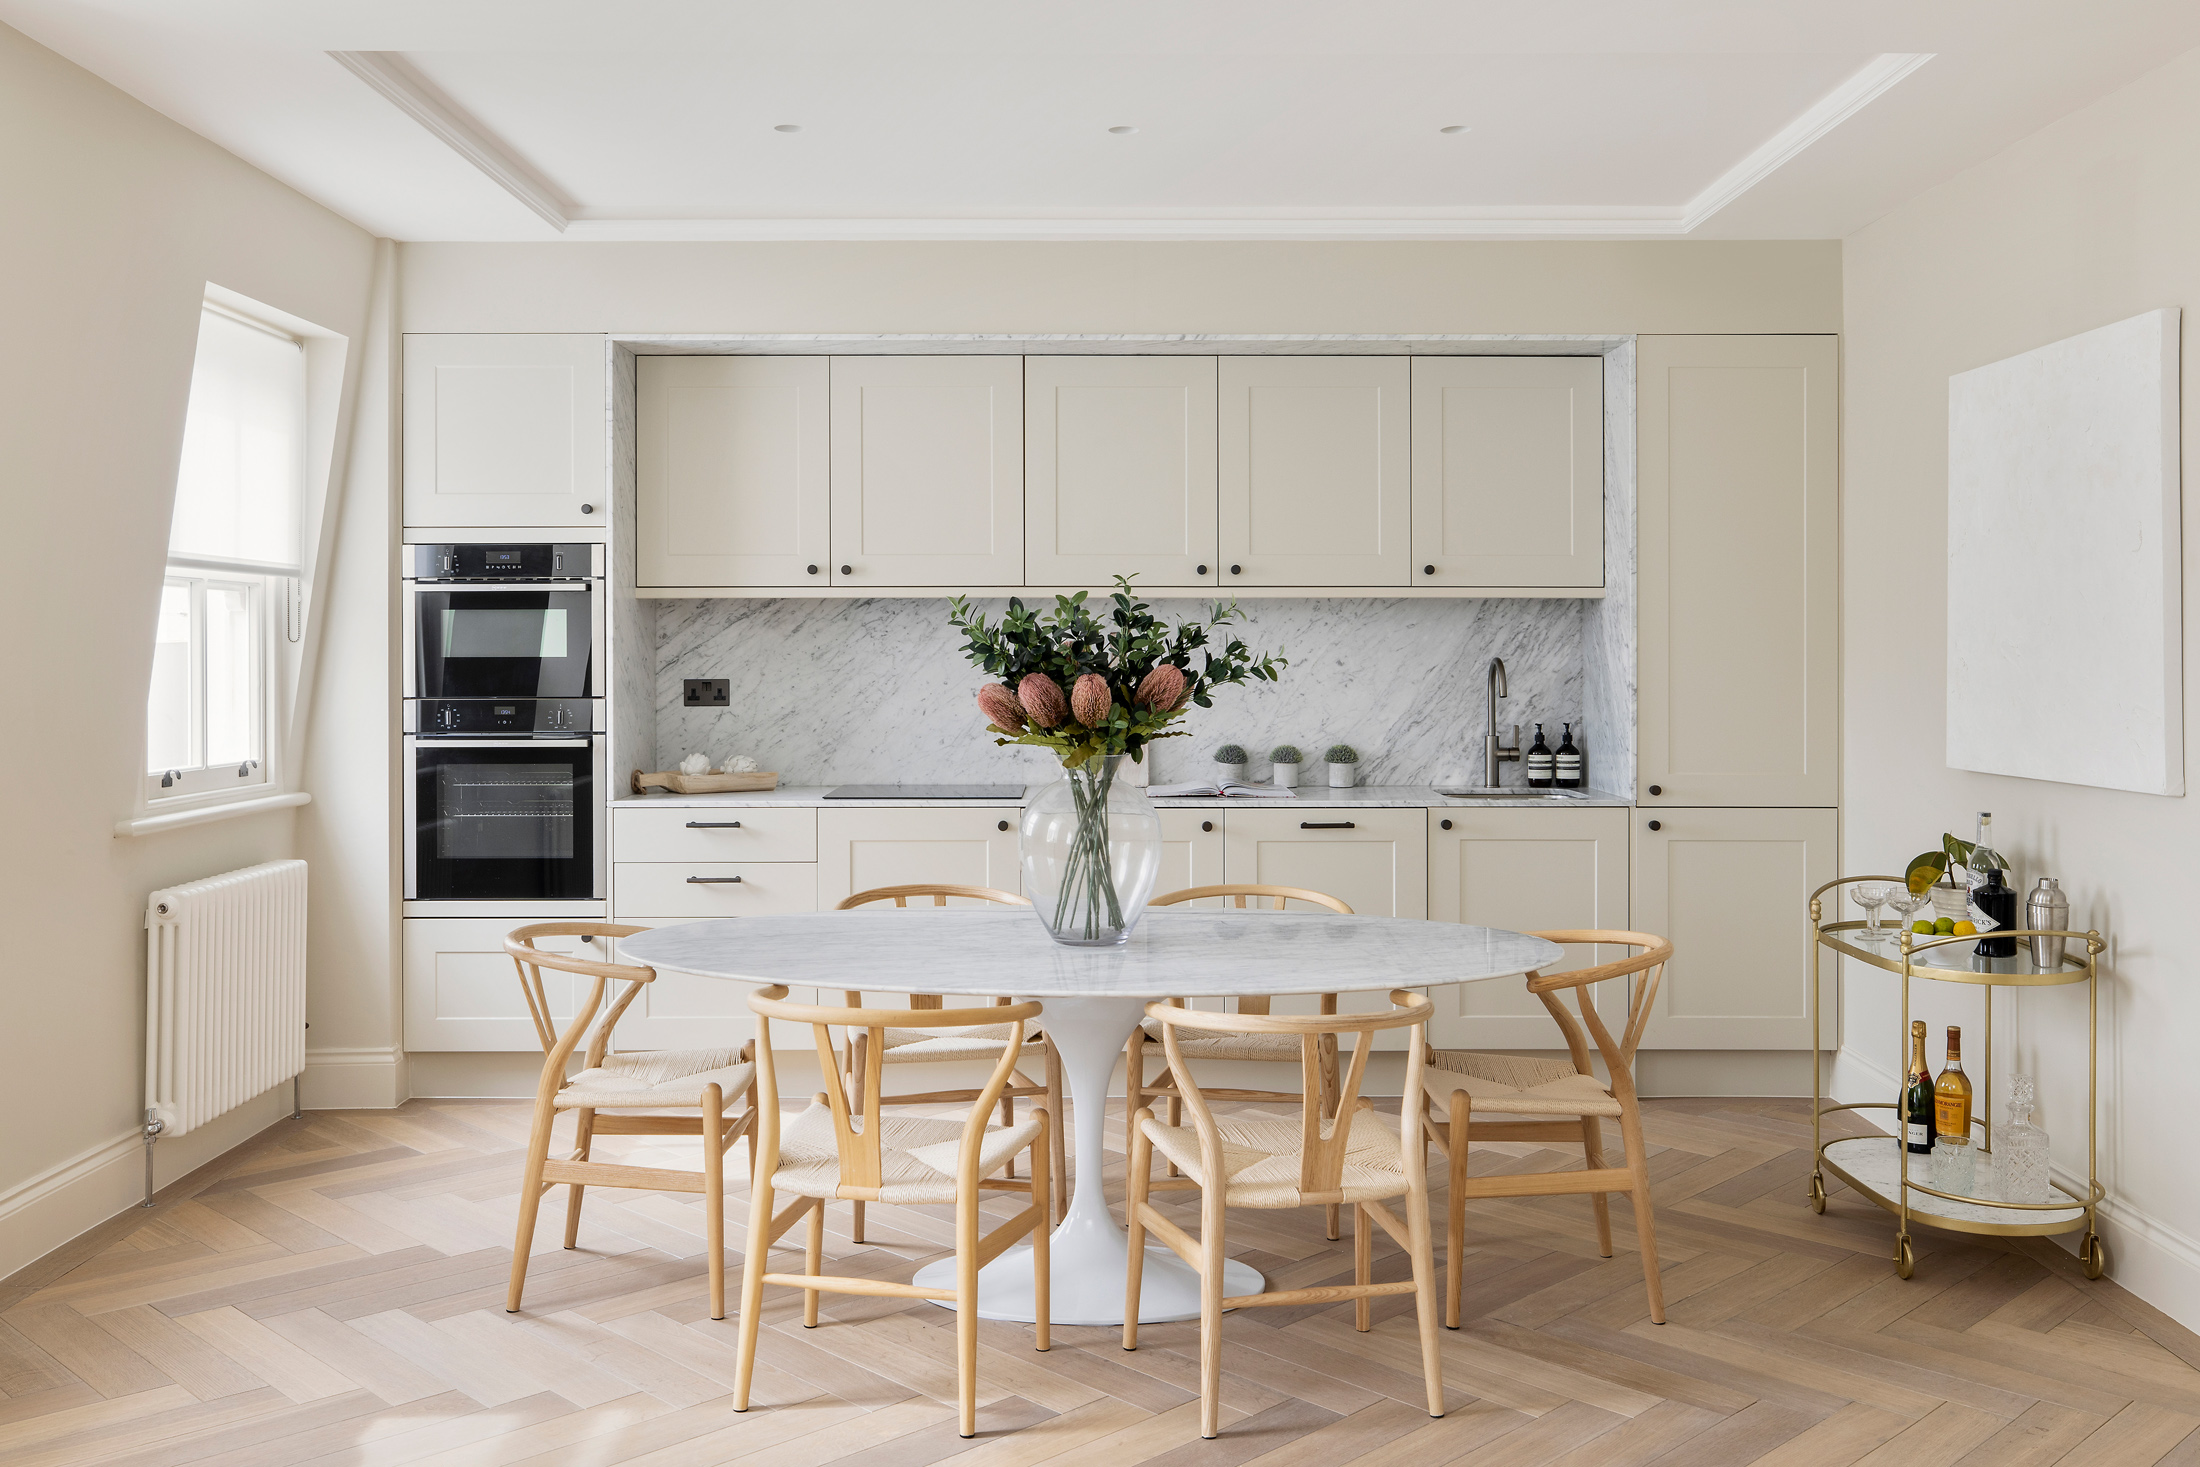 For Sale: Vicarage Gate Kensington W8 contemporary kitchen and dining room with pale parquet floors